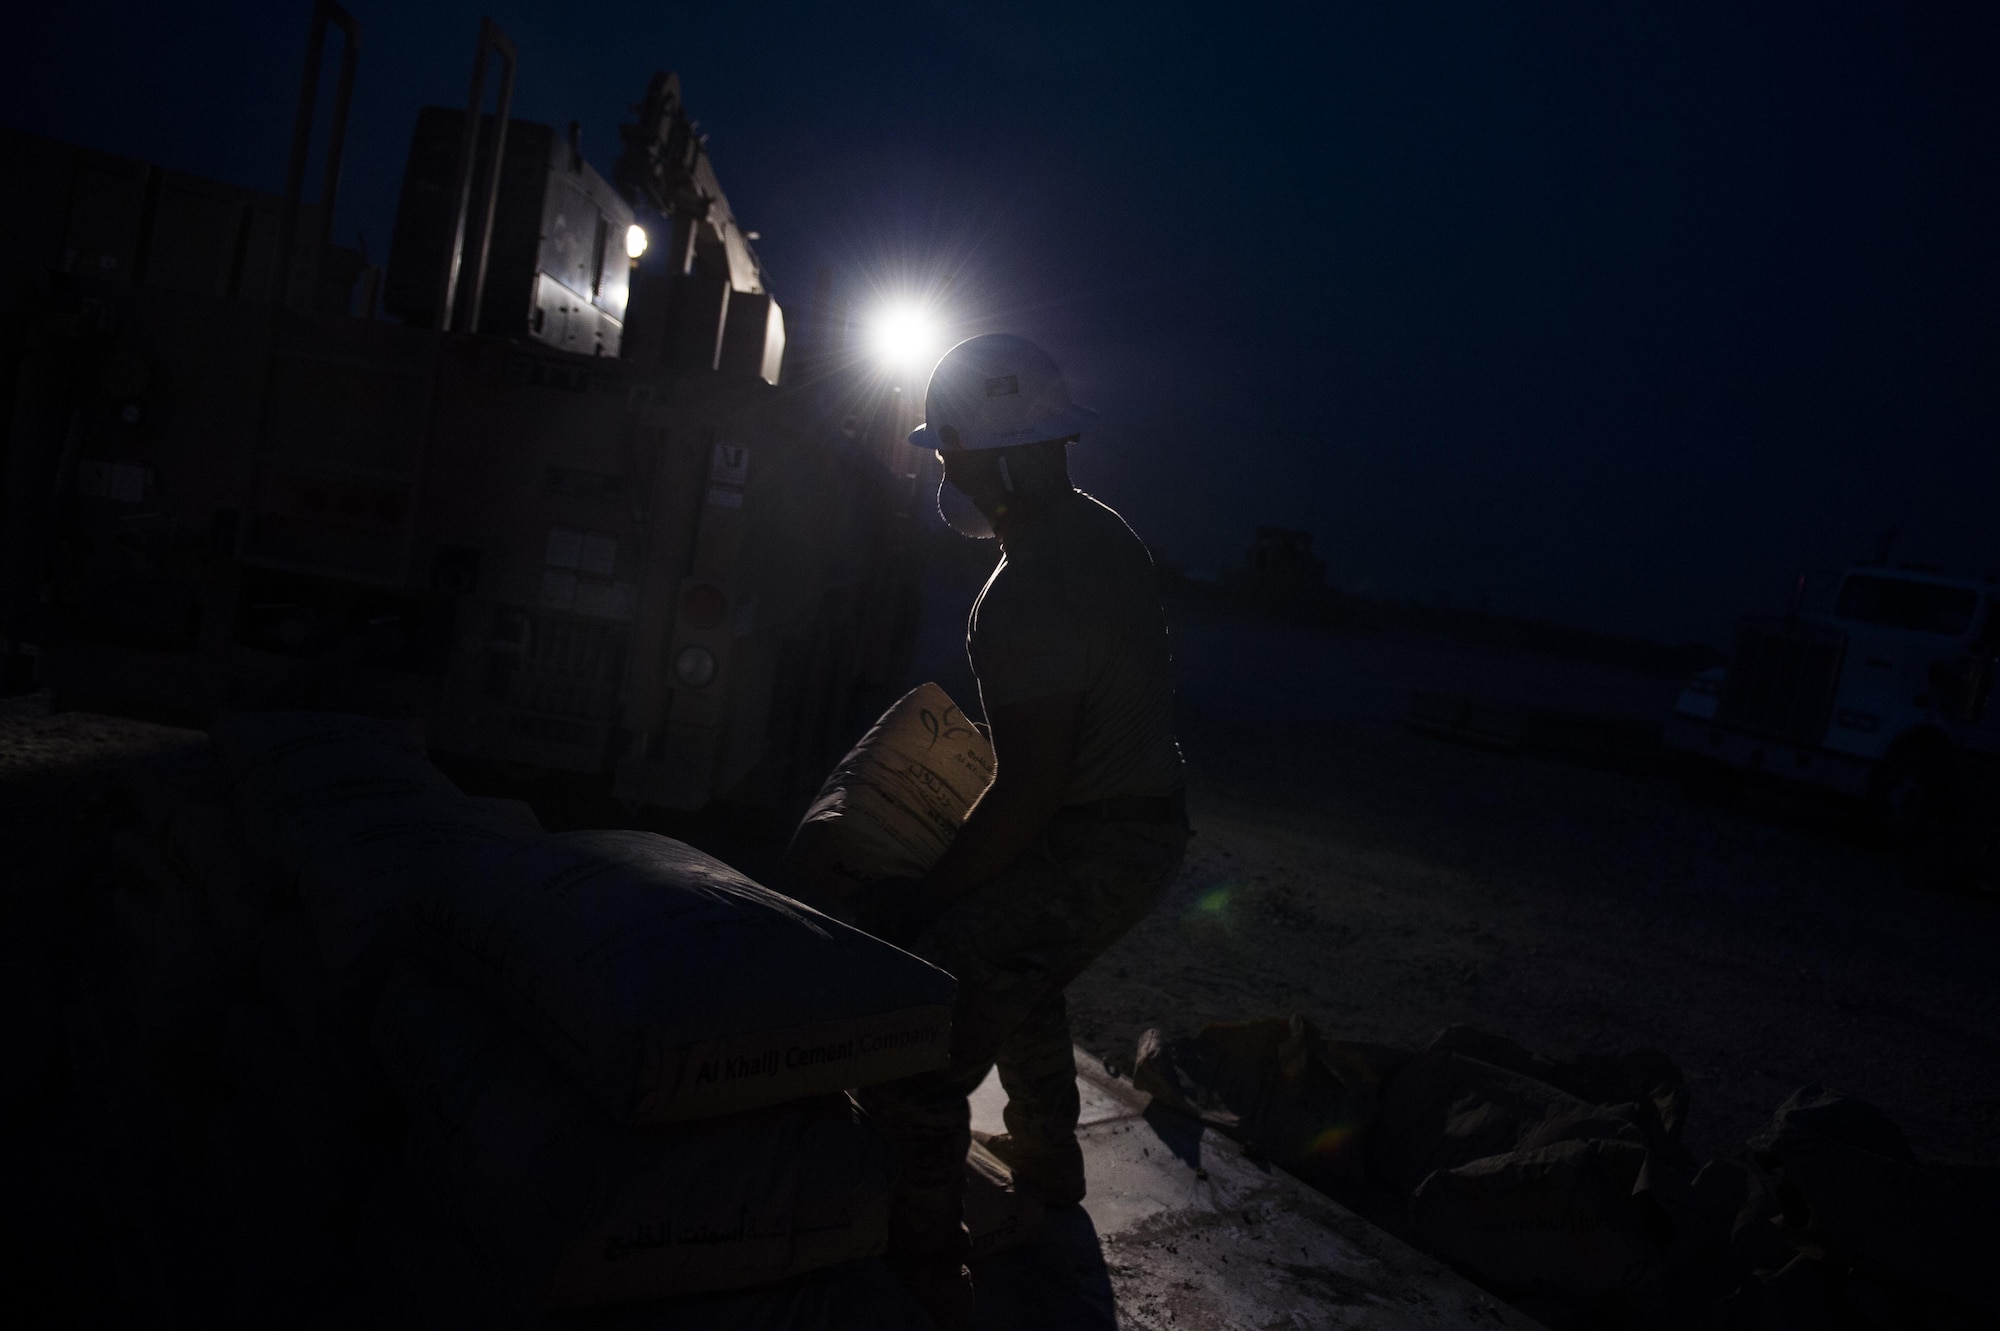 Tech. Sgt. Jason Caceres, 557th Expeditionary Red Horse Squadron well drilling NCOIC, stacks a package of cement onto a pallet at Al Taqaddum Air Base, Iraq, June 3, 2016. The 557th ERHS well drilling team are obtaining an organic water source for Al Taqaddum. Red Horse is helping to improve Iraq's infrastructure in support of the Government of Iraq.
(U.S. Air Force photo/Staff Sgt. Larry E. Reid Jr., Released)